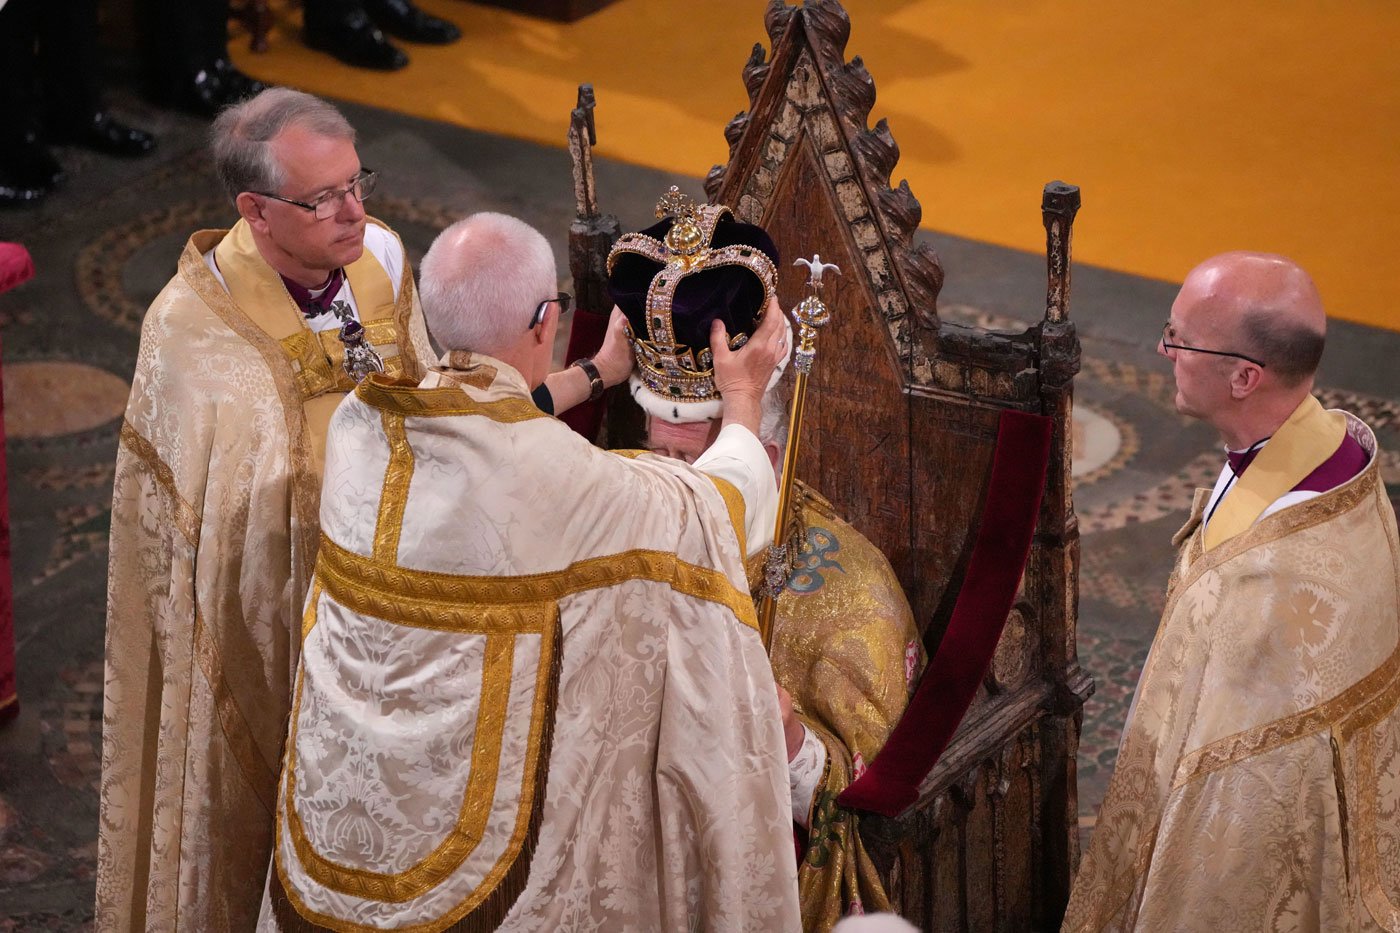 The Archbishop of Centerbury places the St Edward's Crown on the head of King Charles III